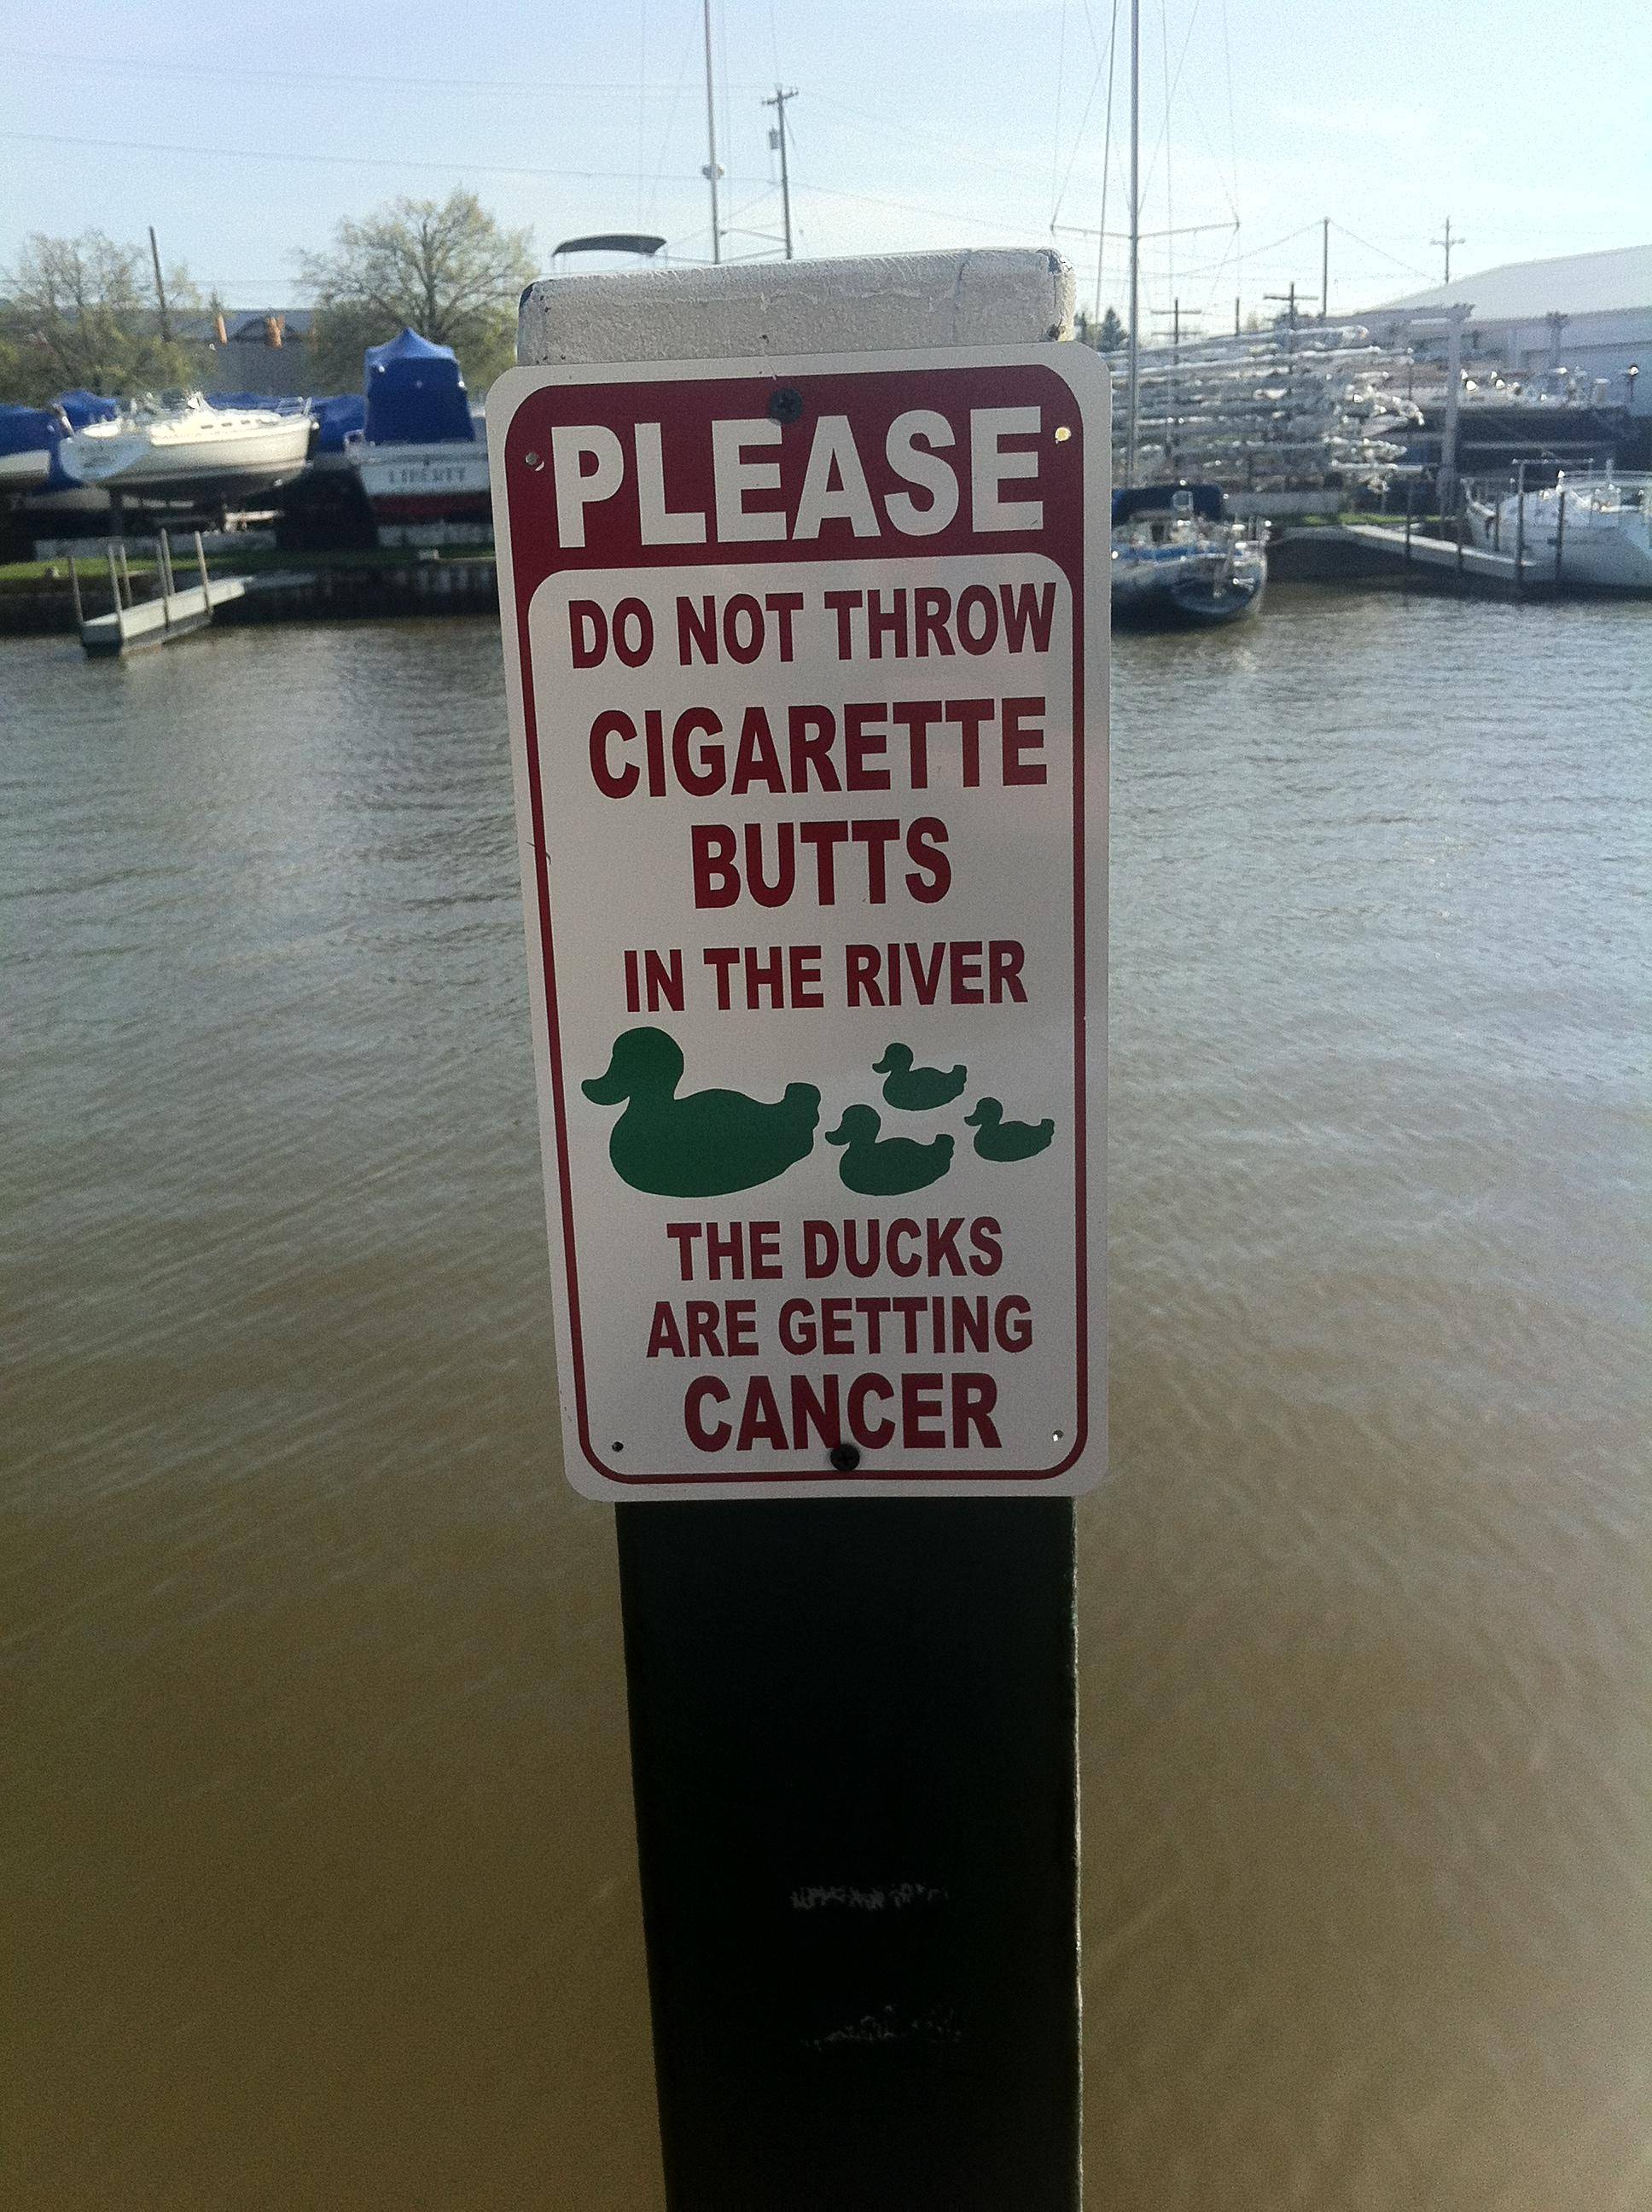 do not throw sign in the river - Please Do Not Throw Cigarette Butts In The River The Ducks Are Getting 1. Cancer